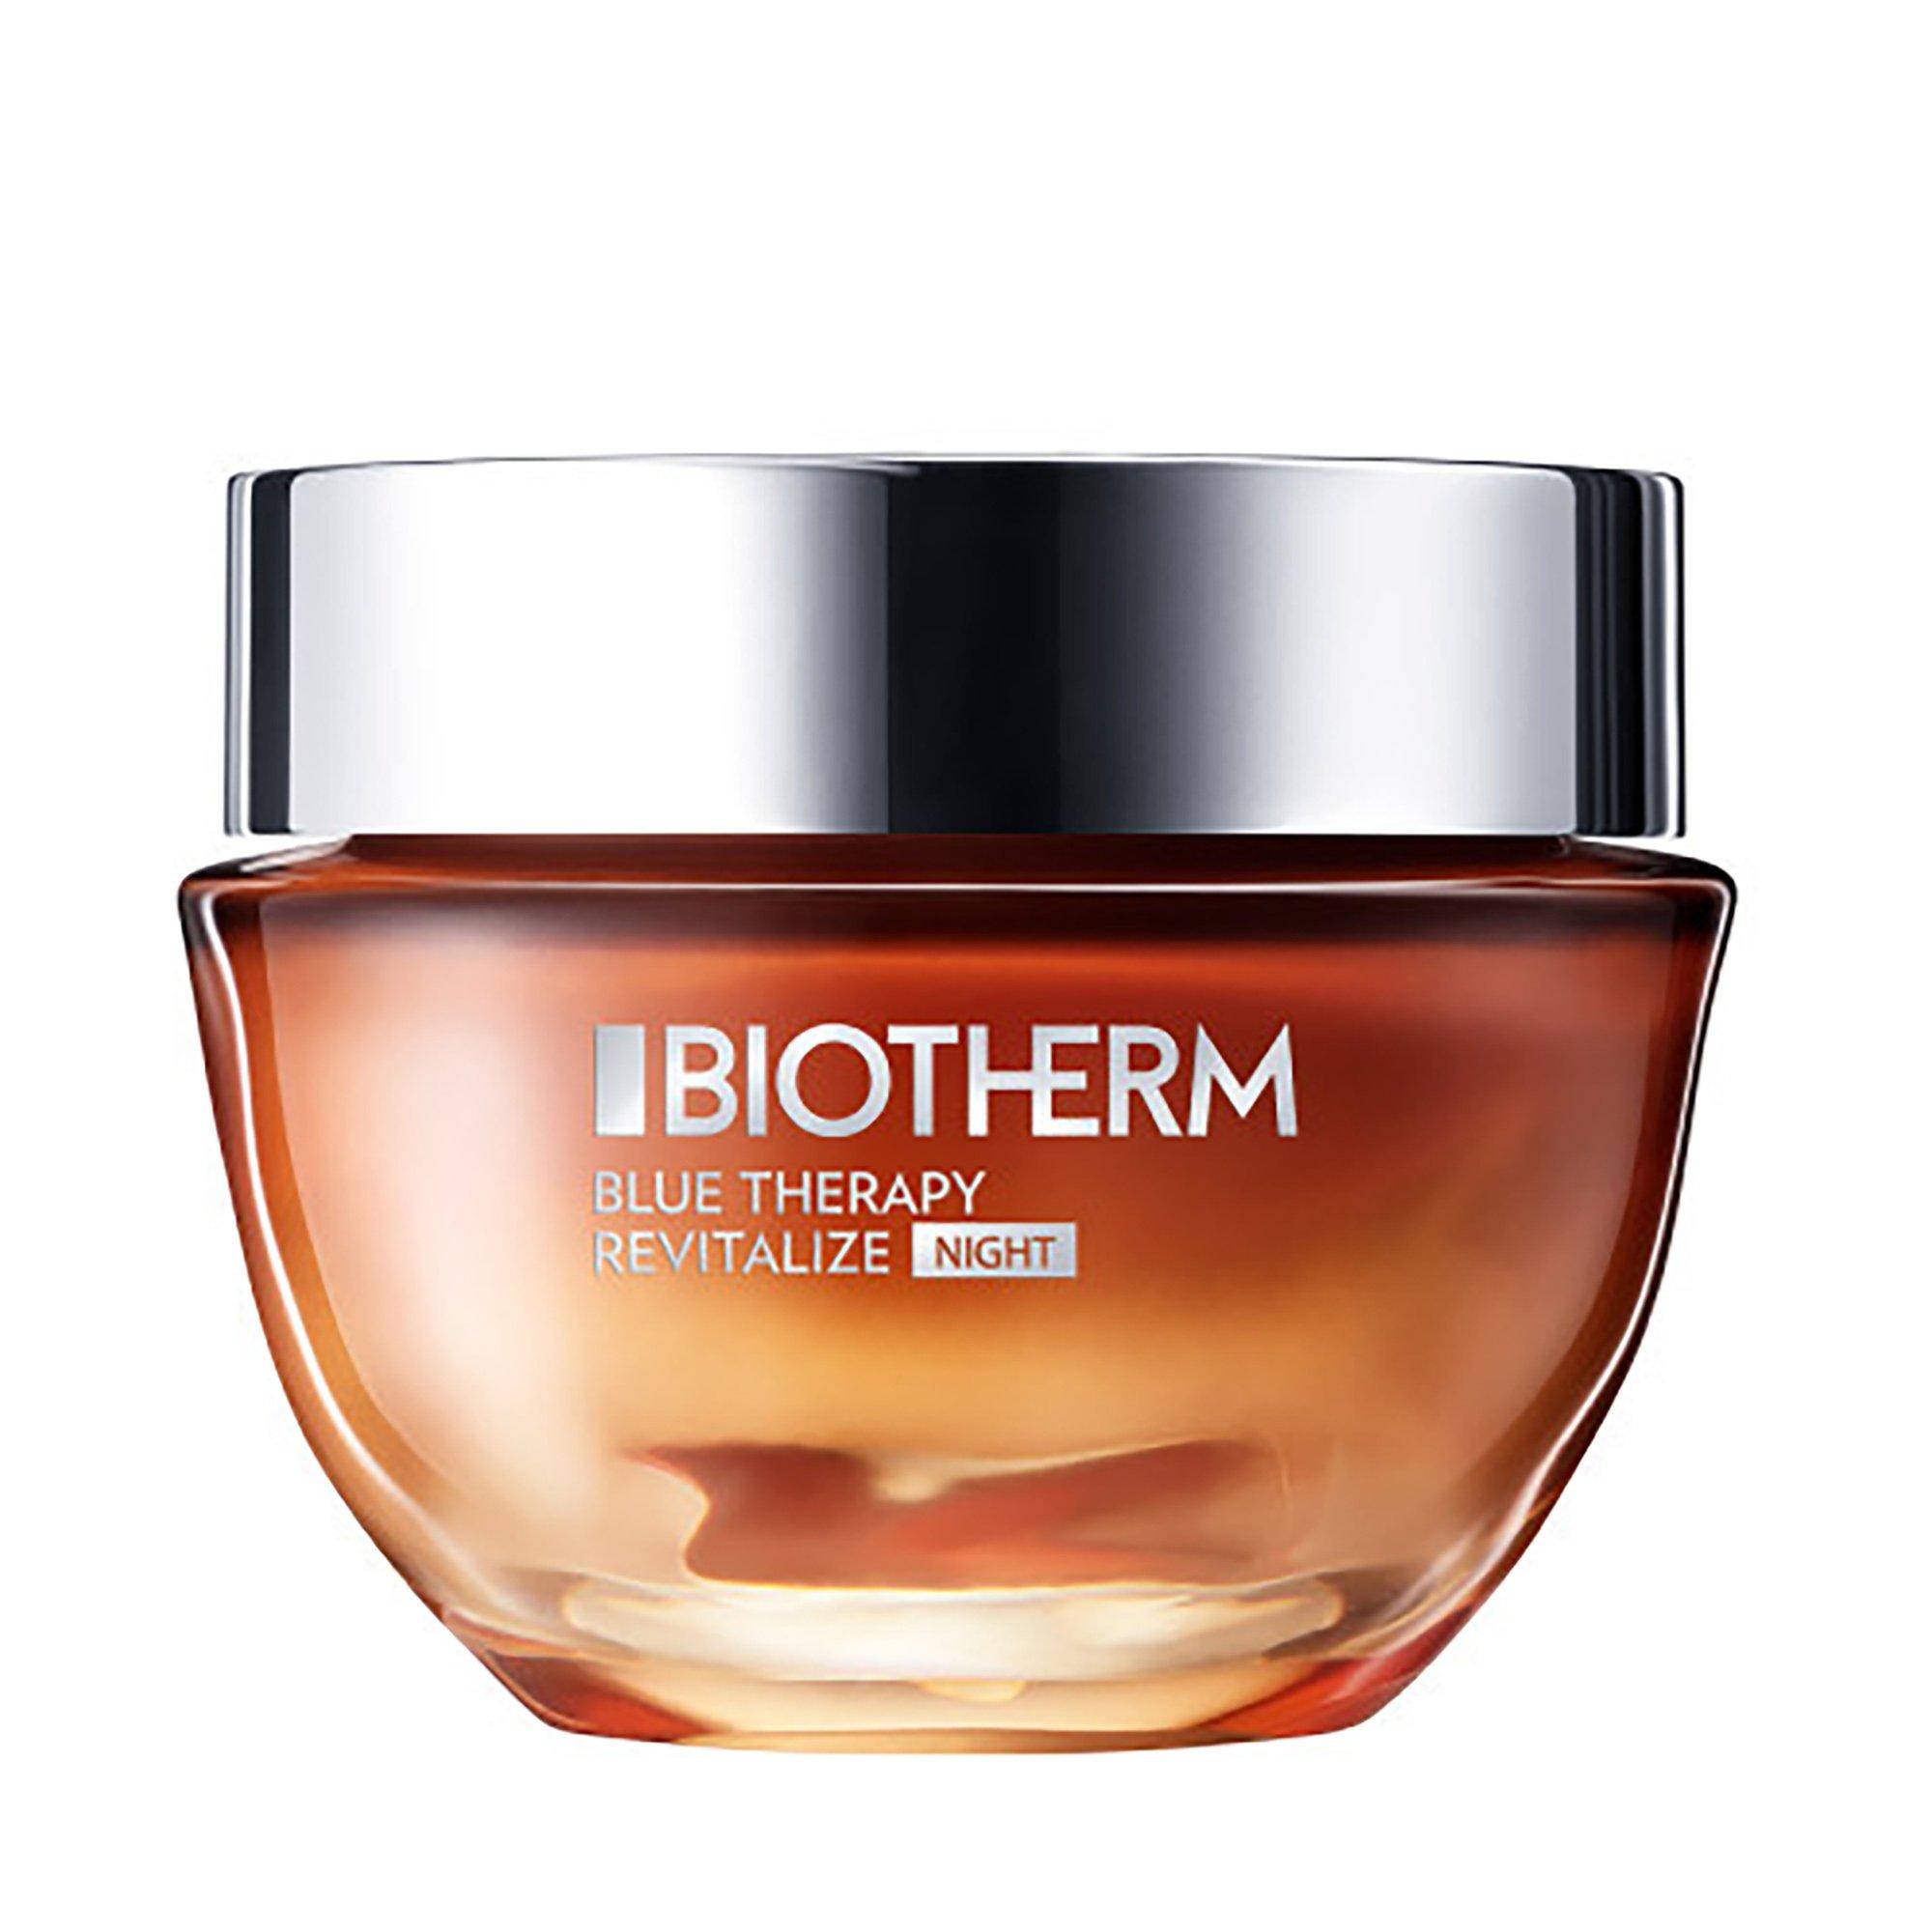 Image of BIOTHERM Blue Therapy Blue Therapy Revitalize Night ? Anti-Aging Nachtcreme Für Mehr Vitalität - 50ml